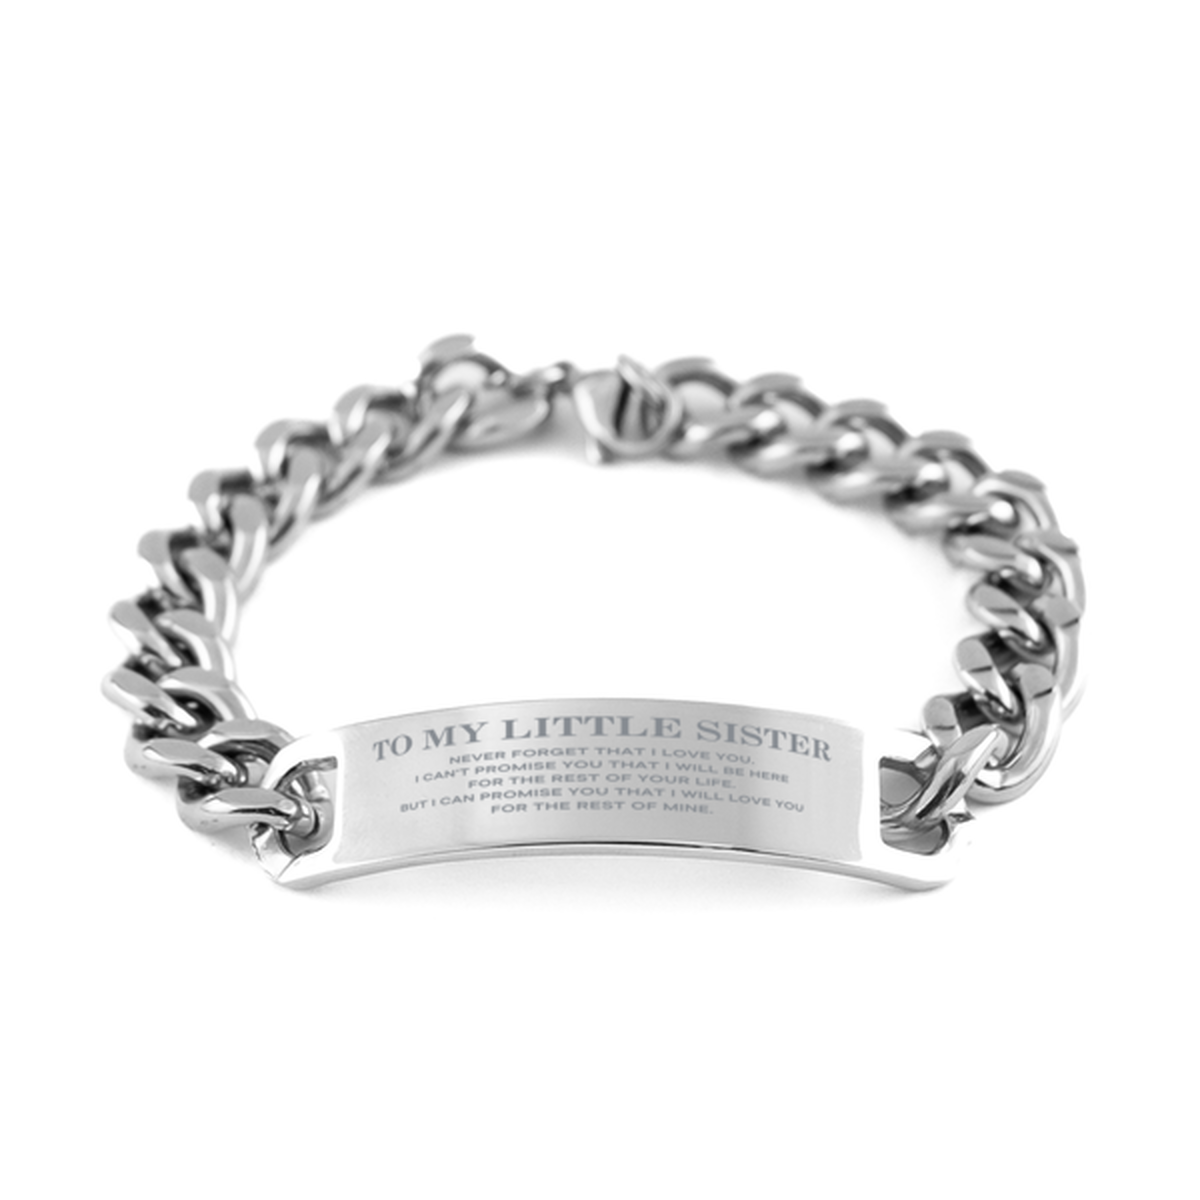 To My Little Sister Gifts, I will love you for the rest of mine, Love Little Sister Bracelet, Birthday Christmas Unique Cuban Chain Stainless Steel Bracelet For Little Sister